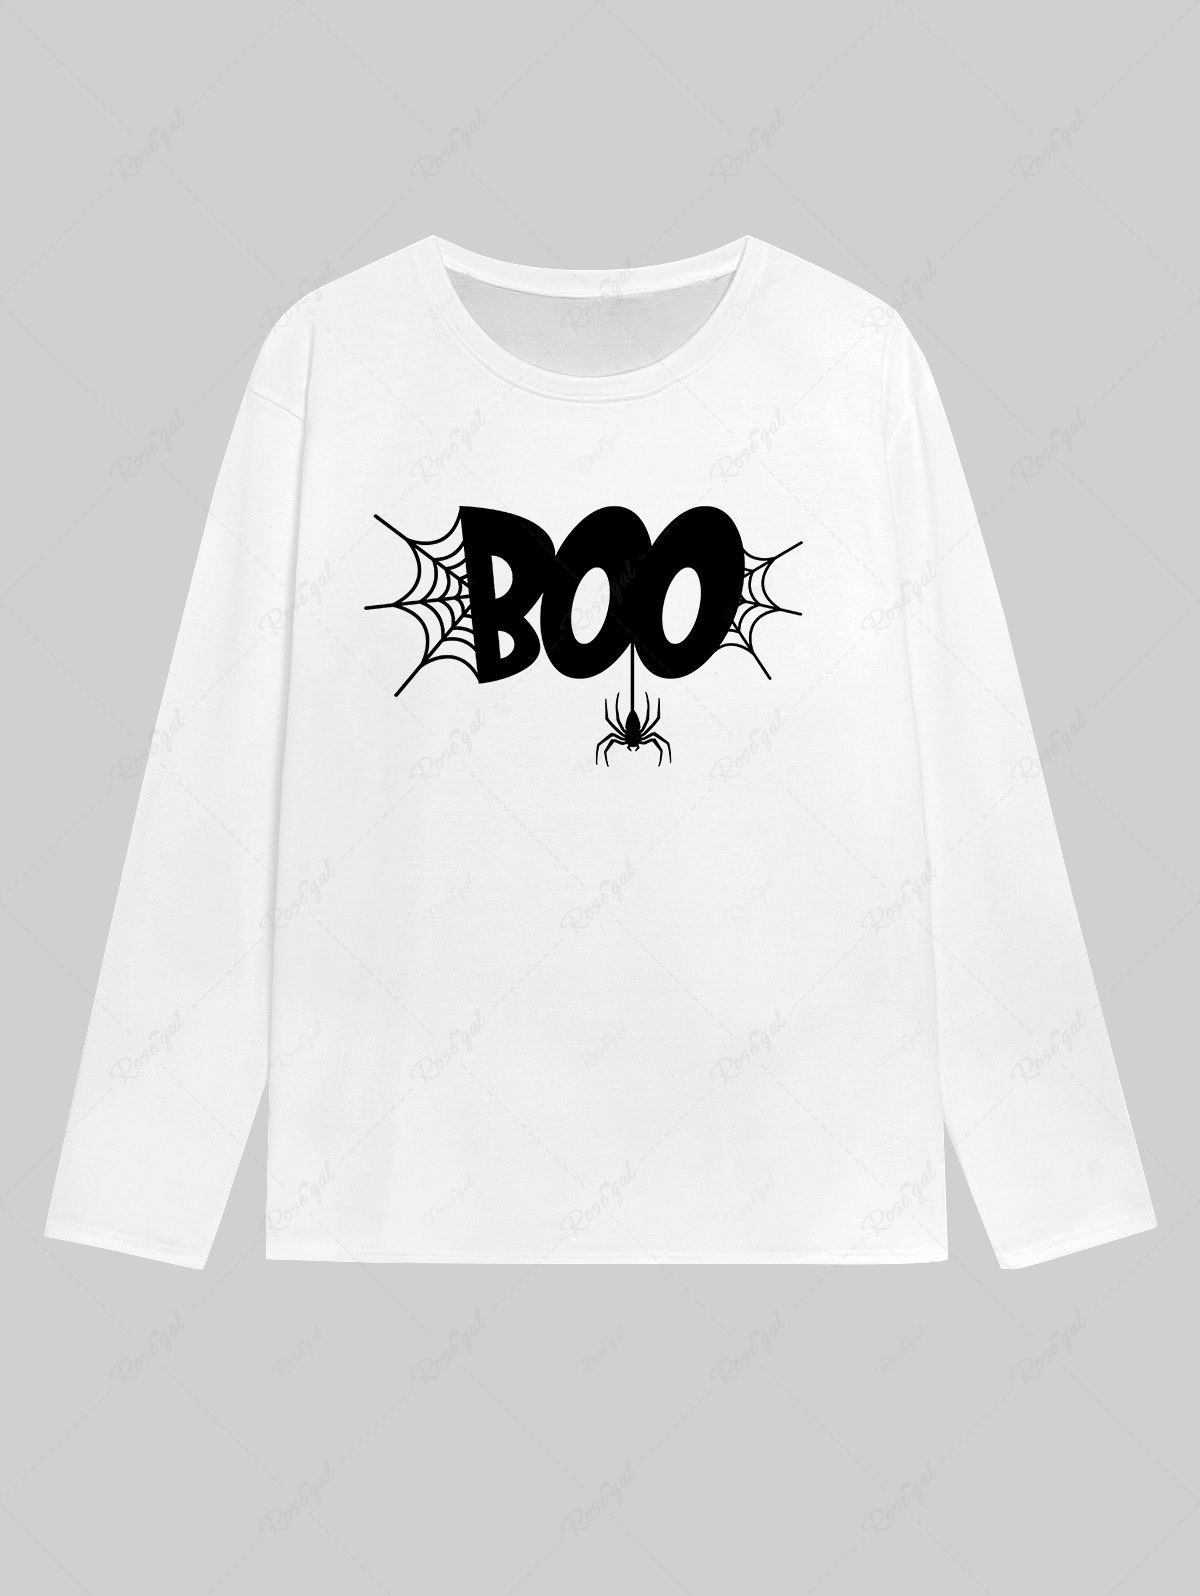 Cheap Gothic Spider Web Letters Print T-shirt For Men  